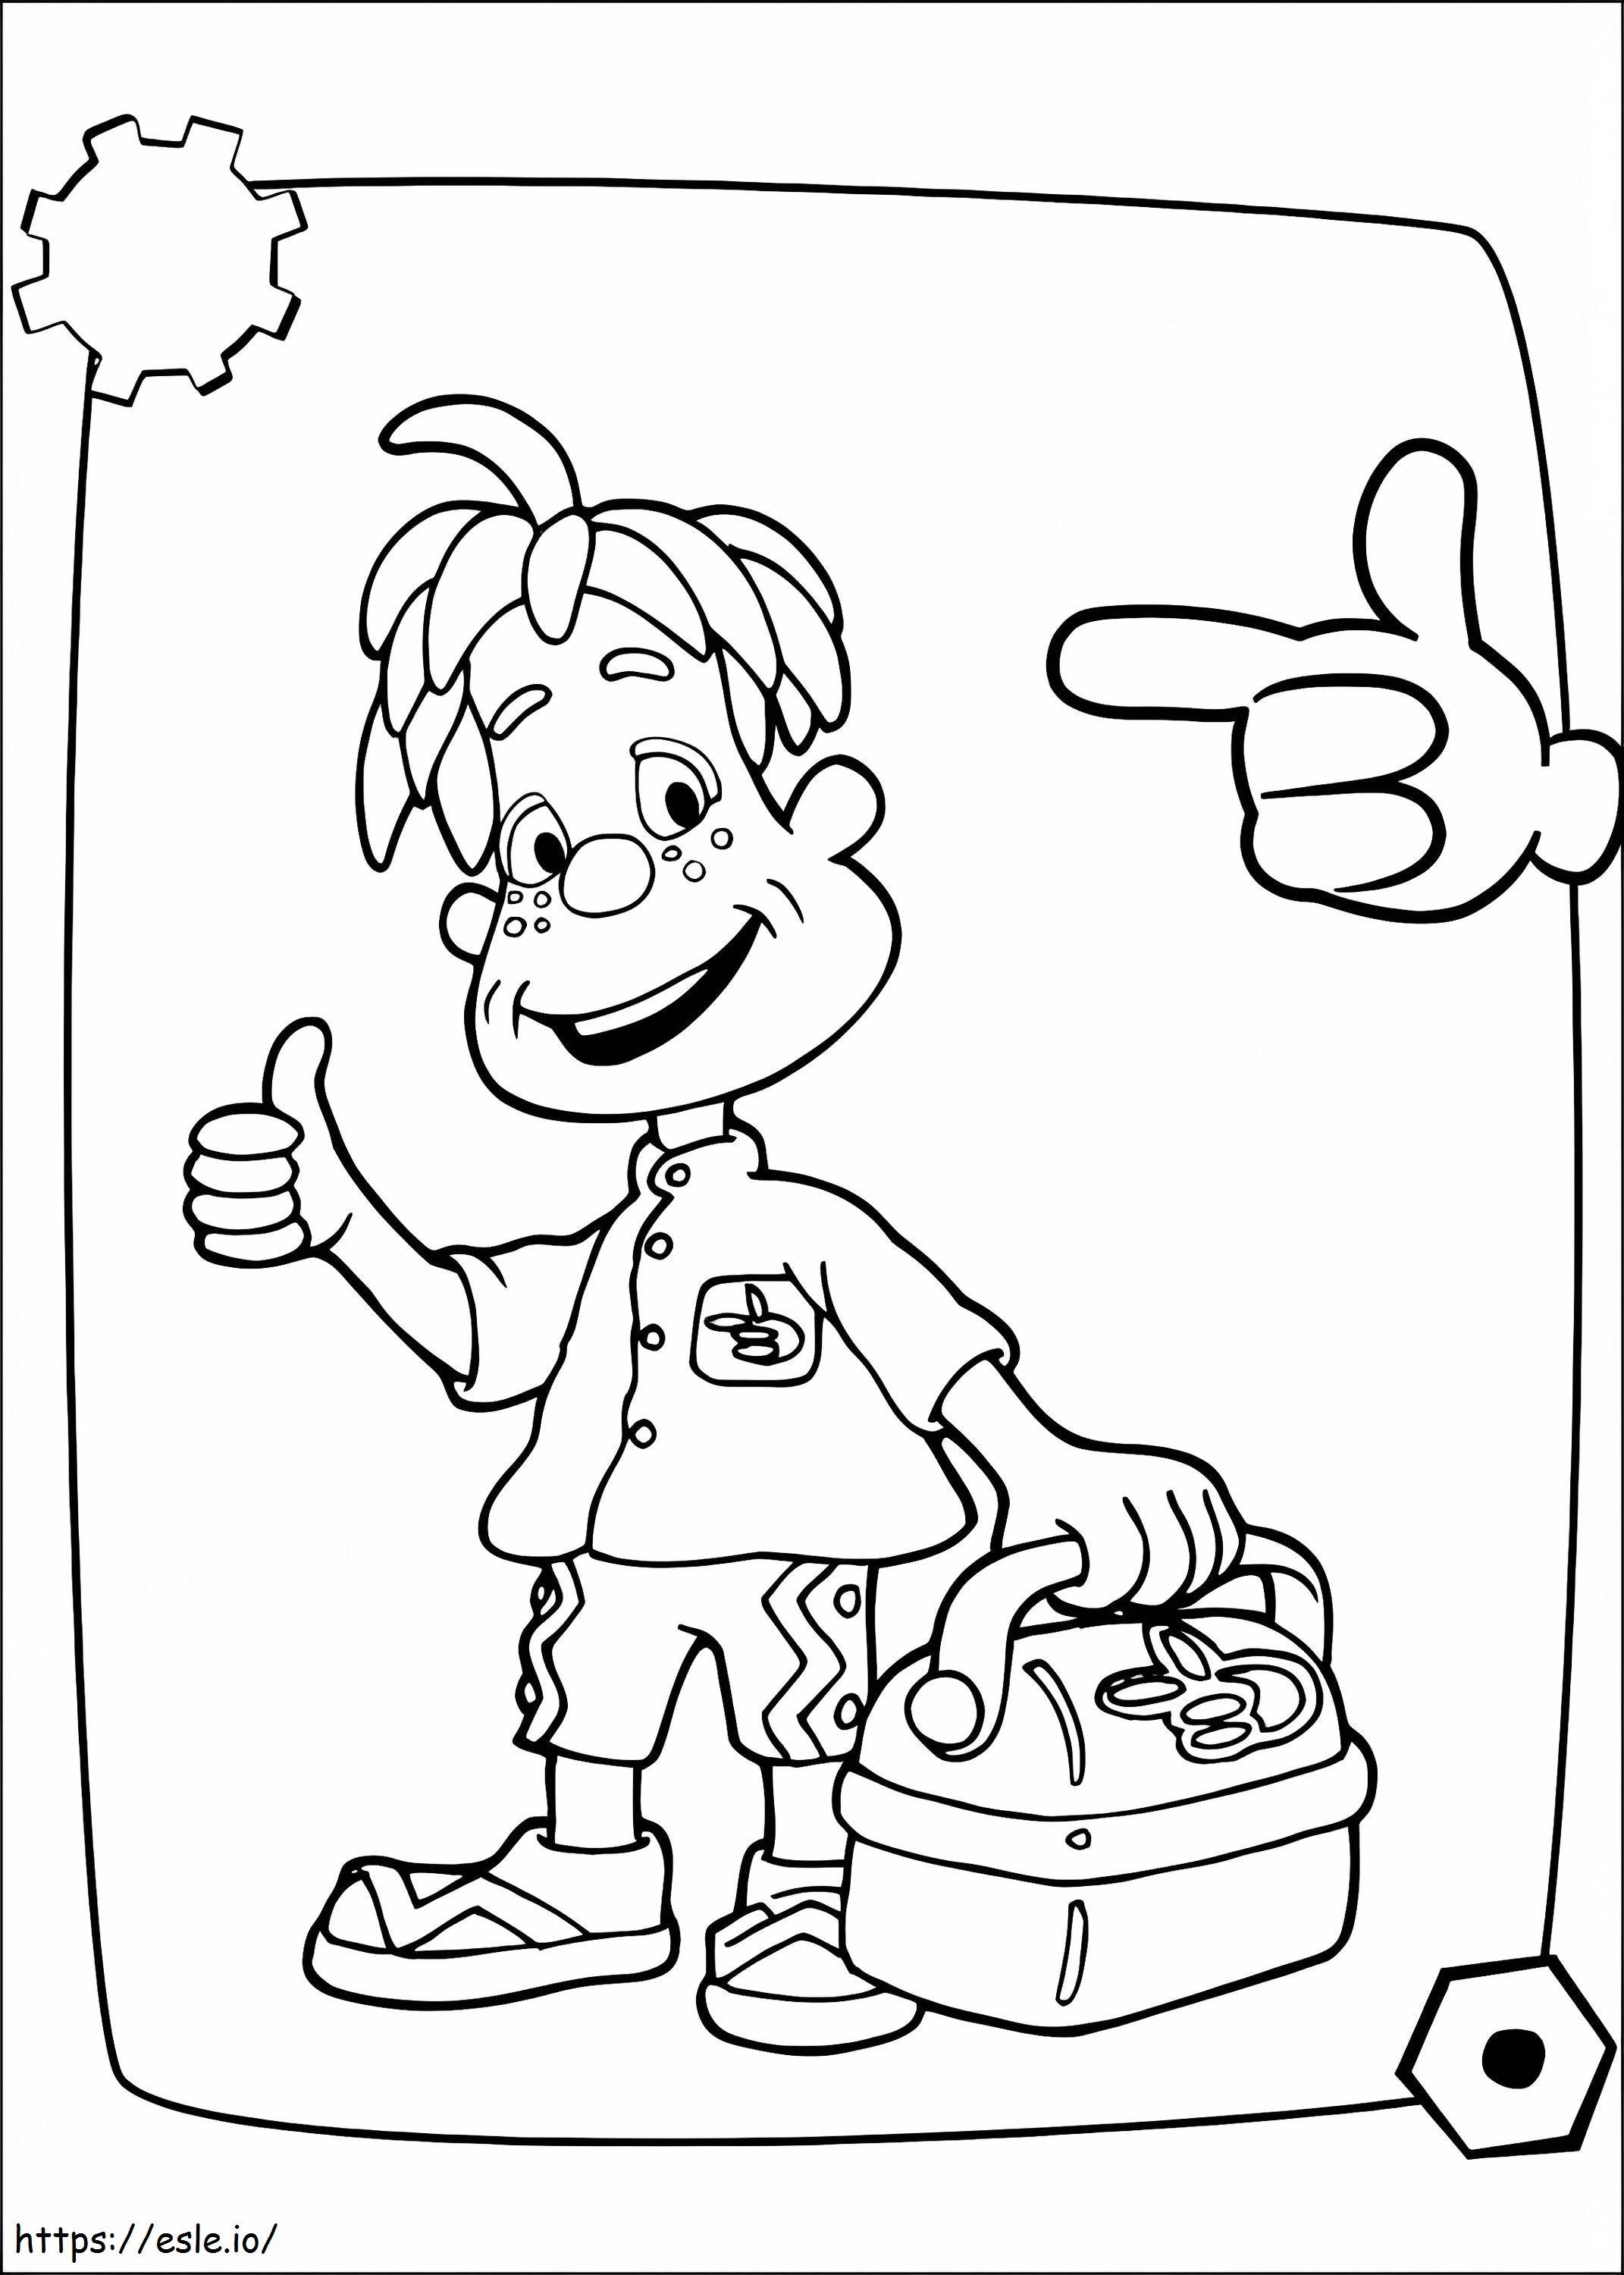 Engie Benjy Smiling coloring page